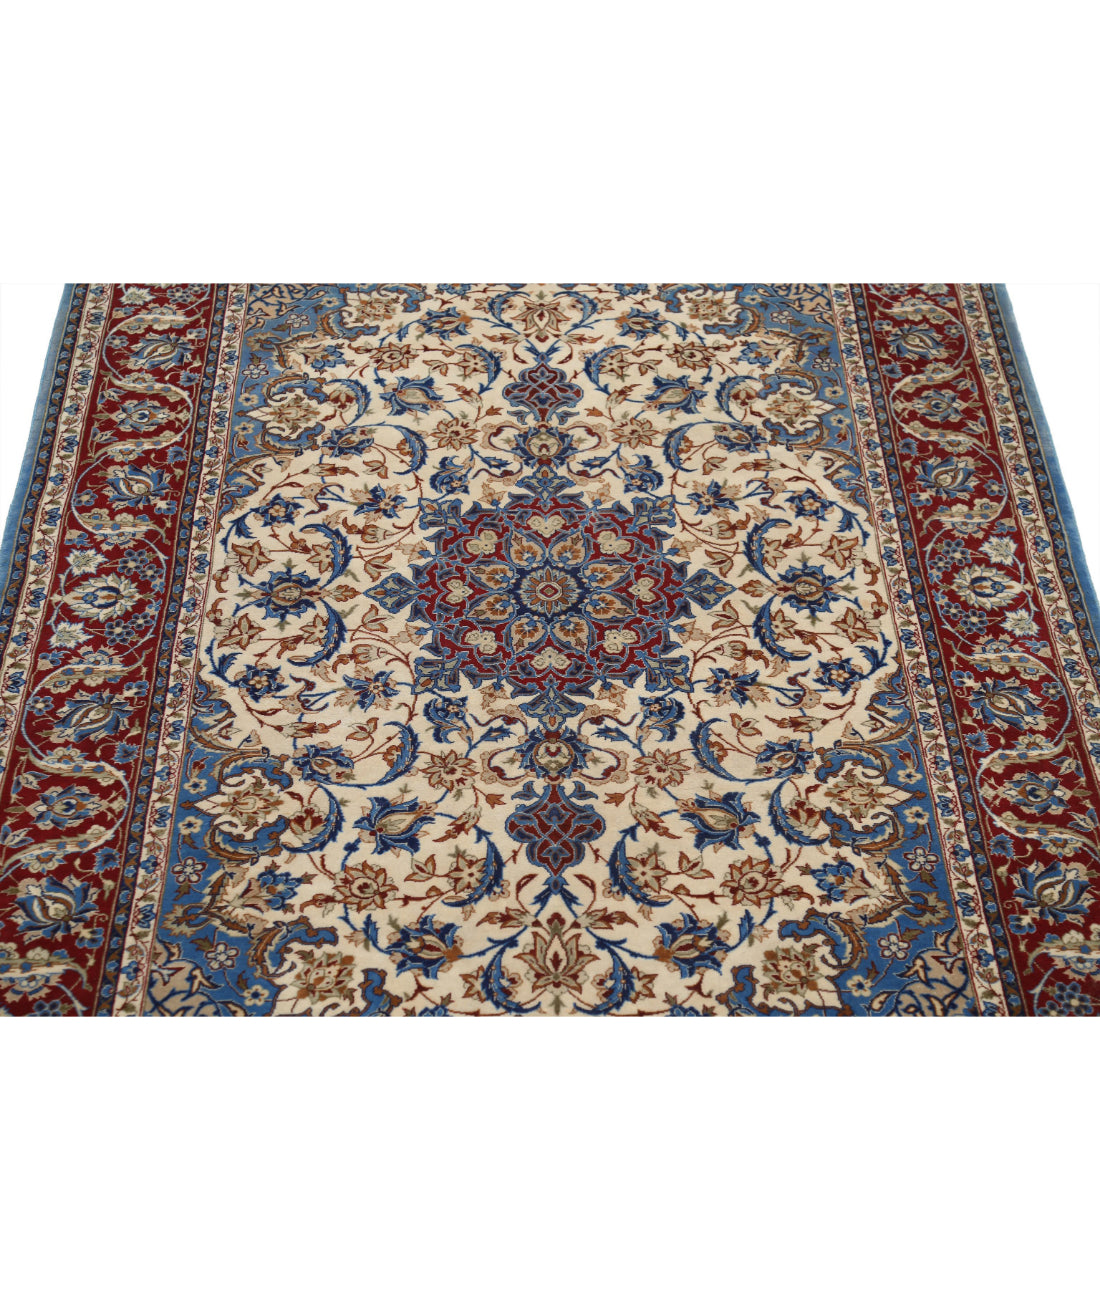 Hand Knotted Masterpiece Persian Isfahan Wool & Silk Rug - 3'7'' x 5'5'' 3'7'' x 5'5'' (108 X 163) / Ivory / Red